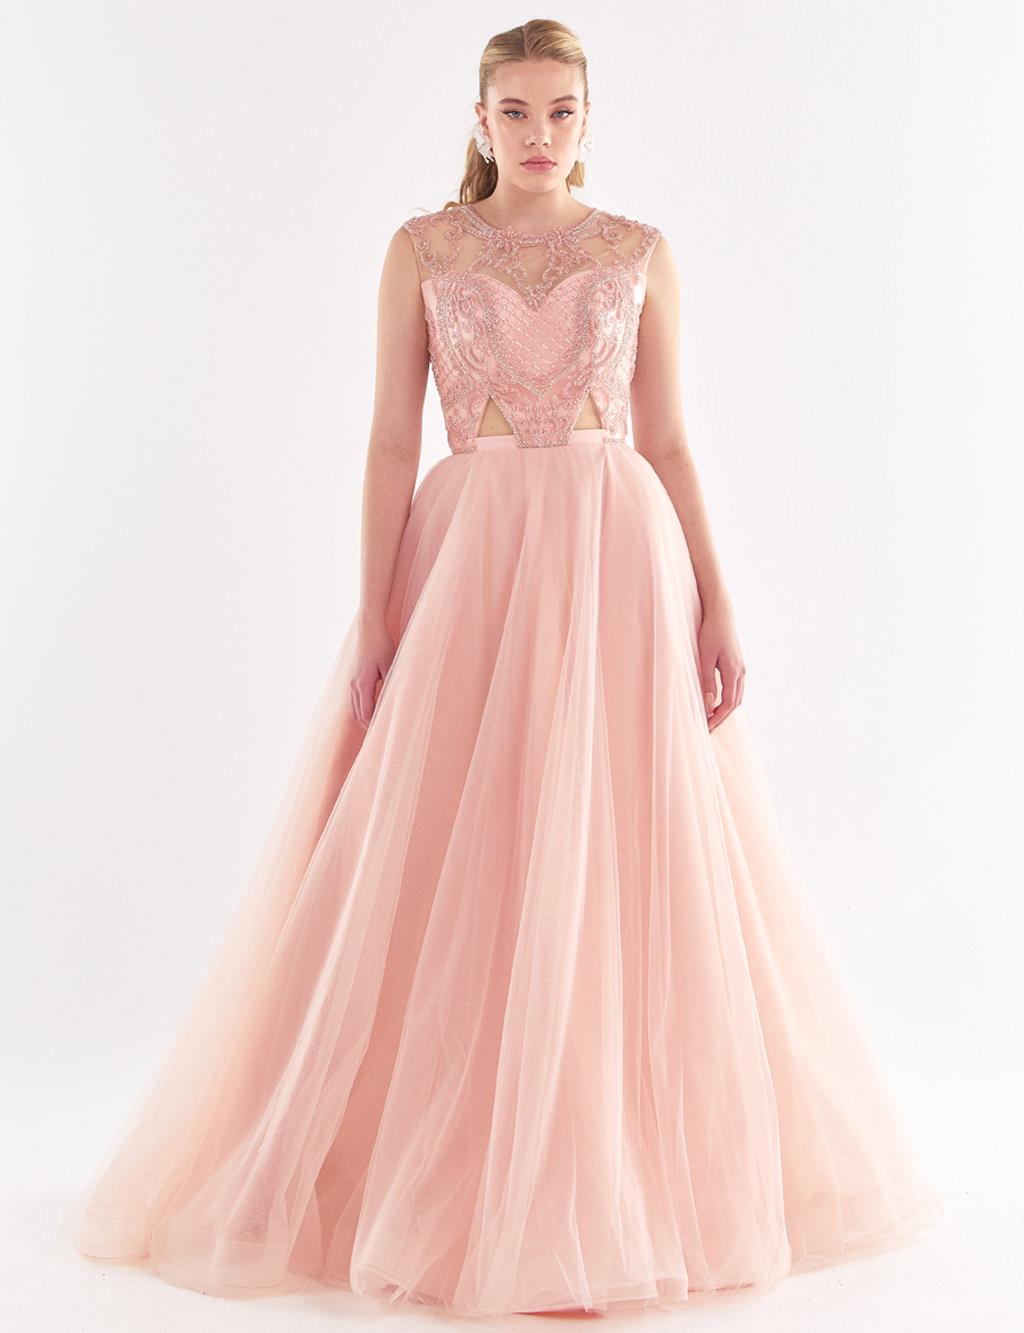 Illusion Collar Evening Dress With Tulle Skirt Powder